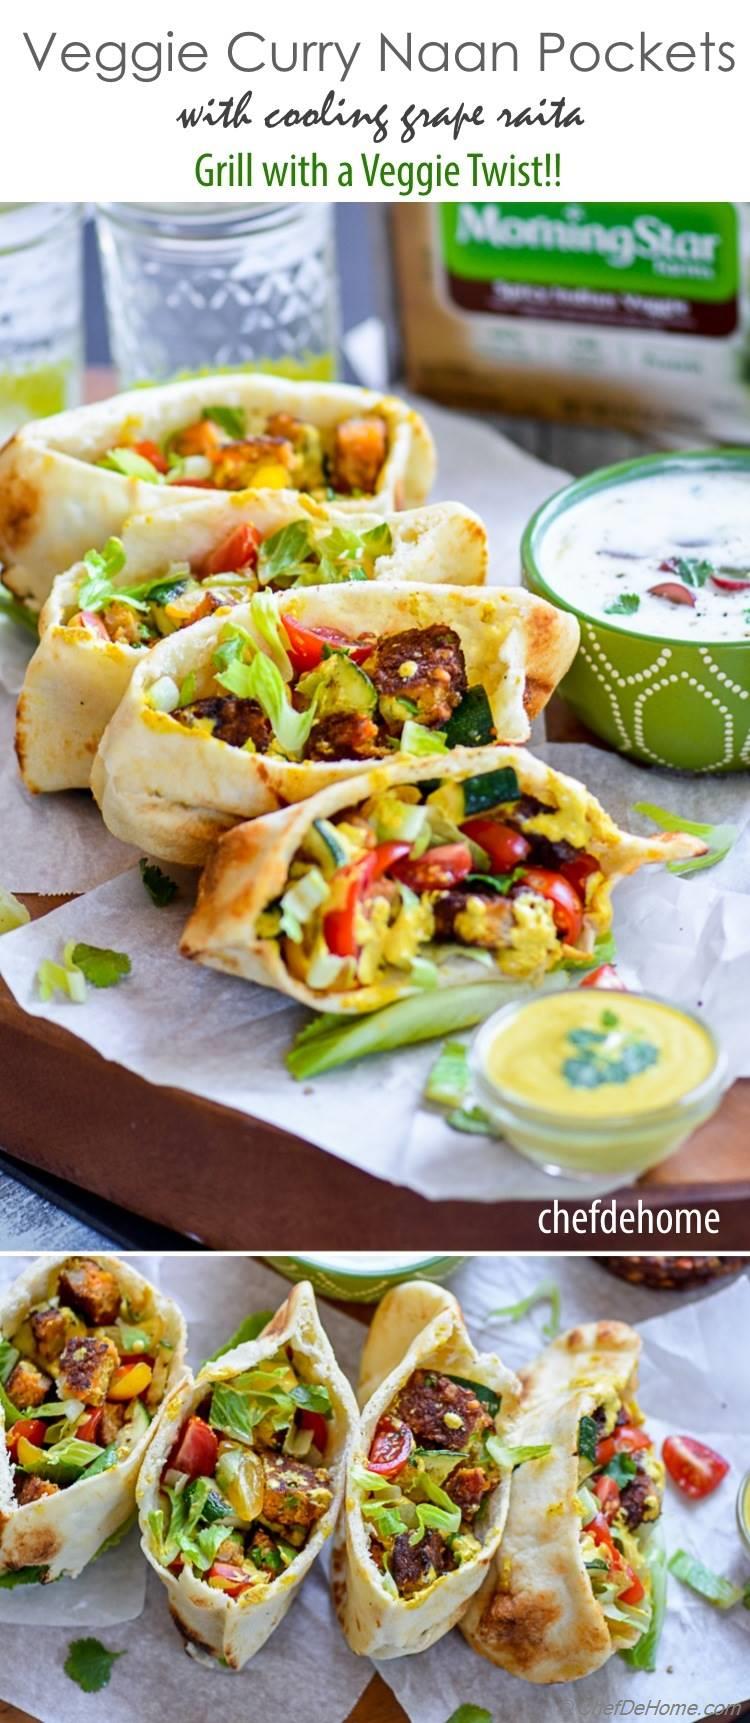 Vegetarian Dinner Ready in no time with Indian Curry Naan Pockets | chefdehome.com